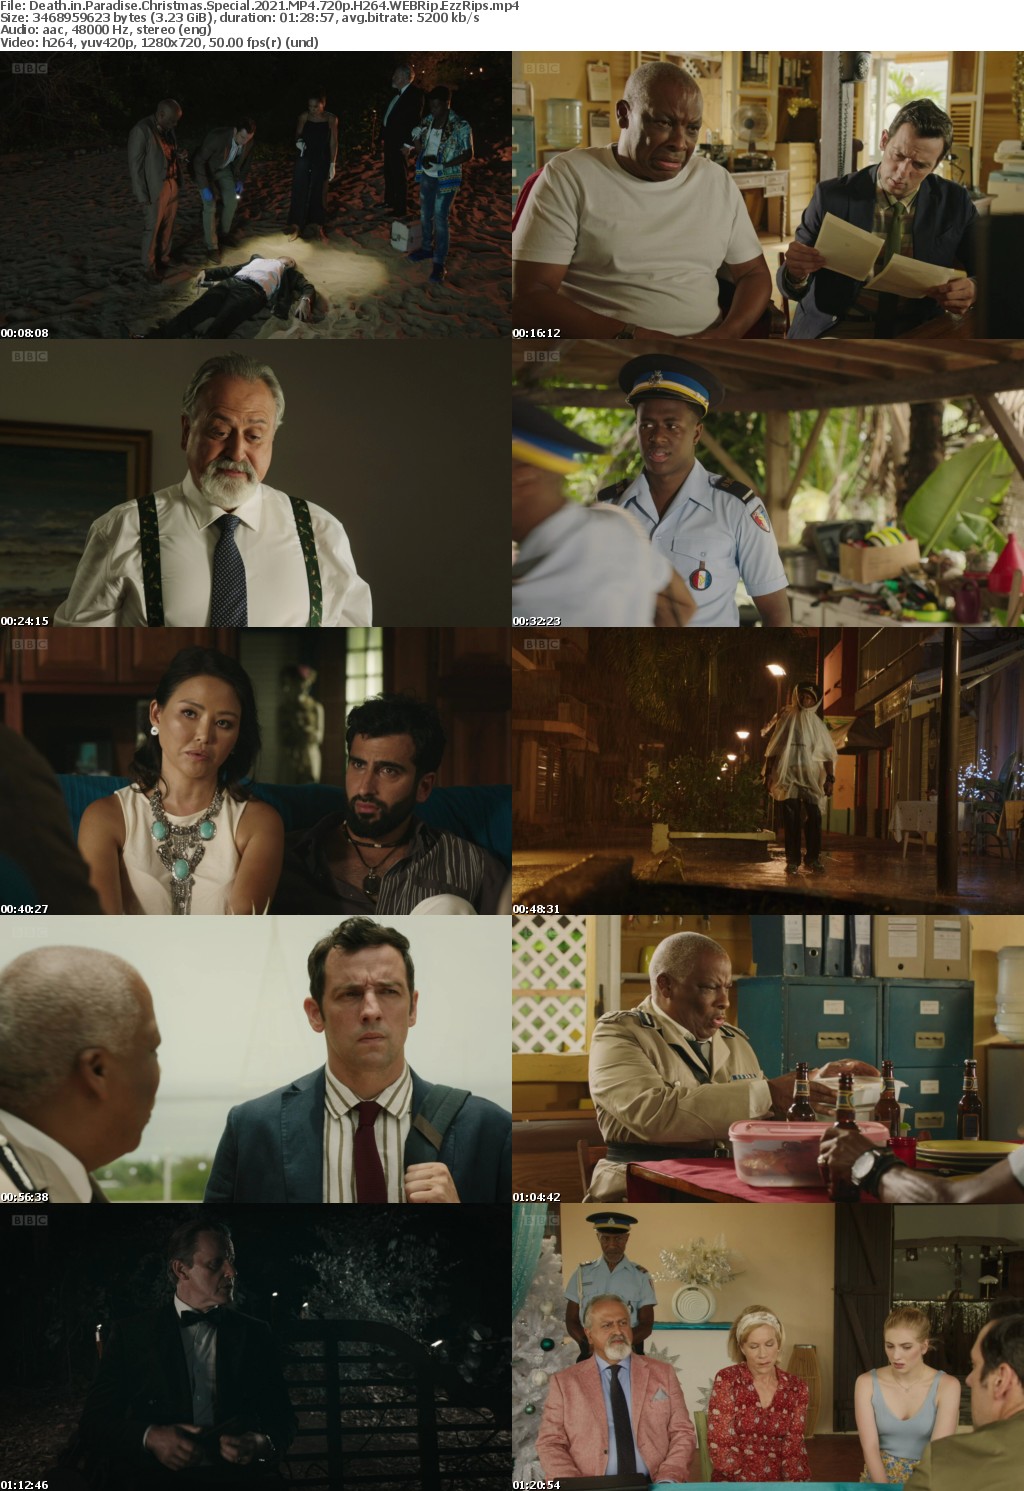 Death in Paradise Christmas Special 2021 MP4 720p H264 WEBRip EzzRips